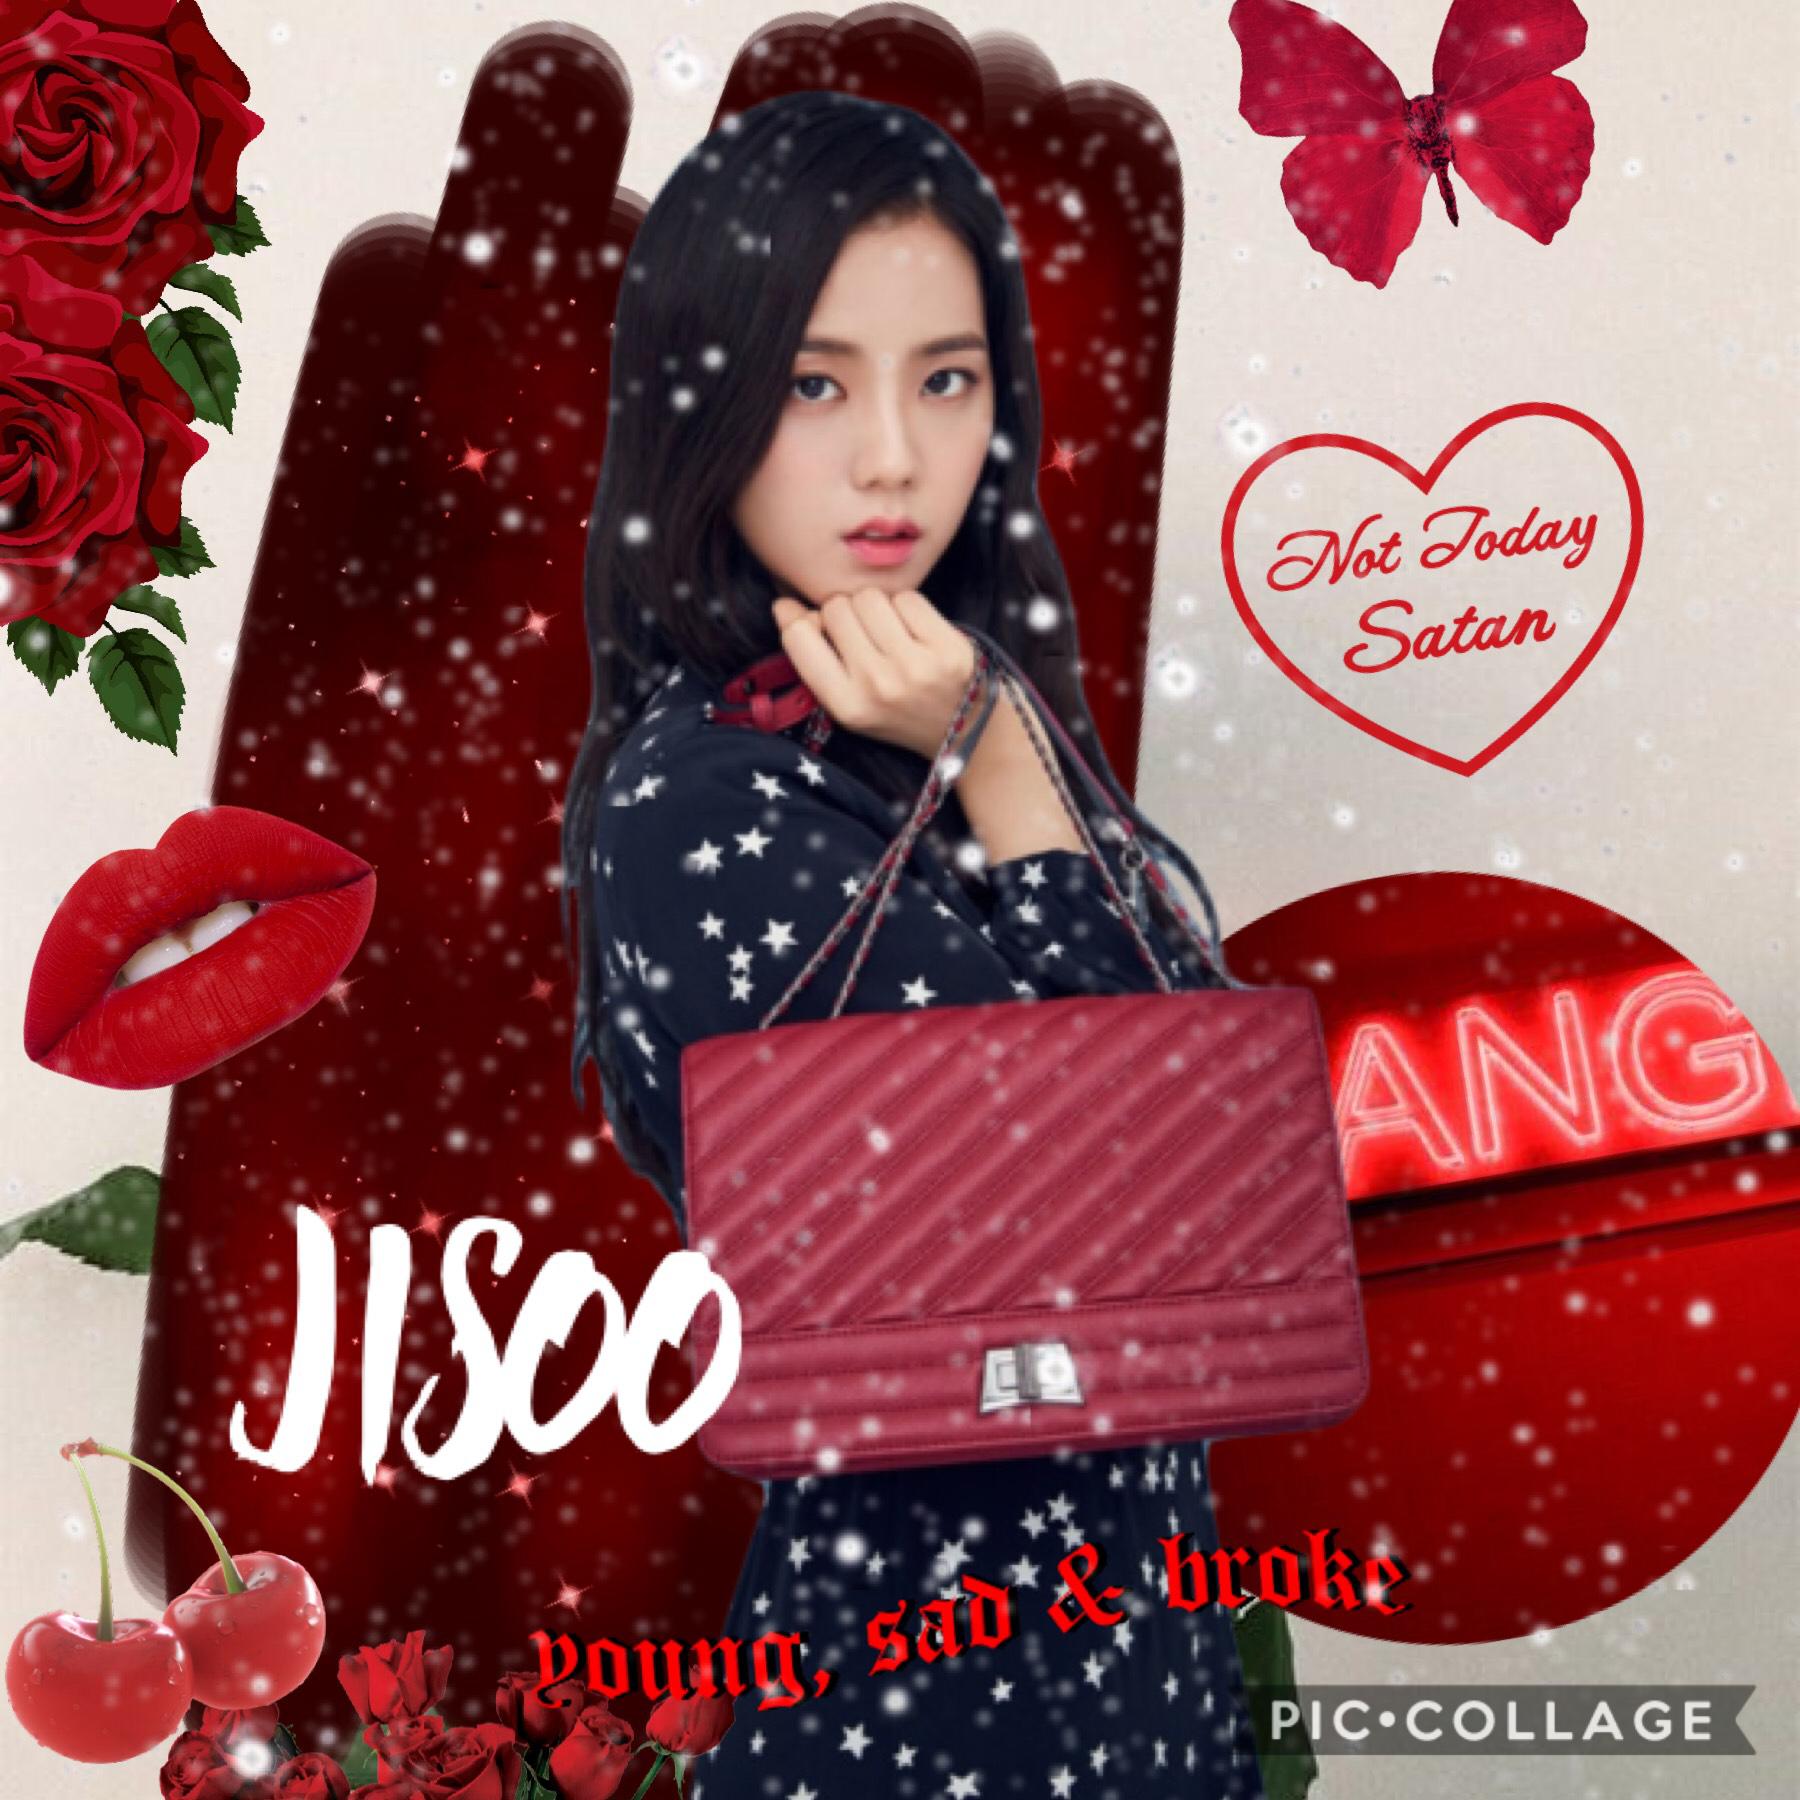 ❤️🌹jisoo🌹❤️ tap

Moving back to America in 1 week!!
It’s almost 9 am (8:47) in beijing and I’m posting edits 🤪✌️

Happy Easter for everyone that celebrates it!
If you don’t, have an amazing sunday~